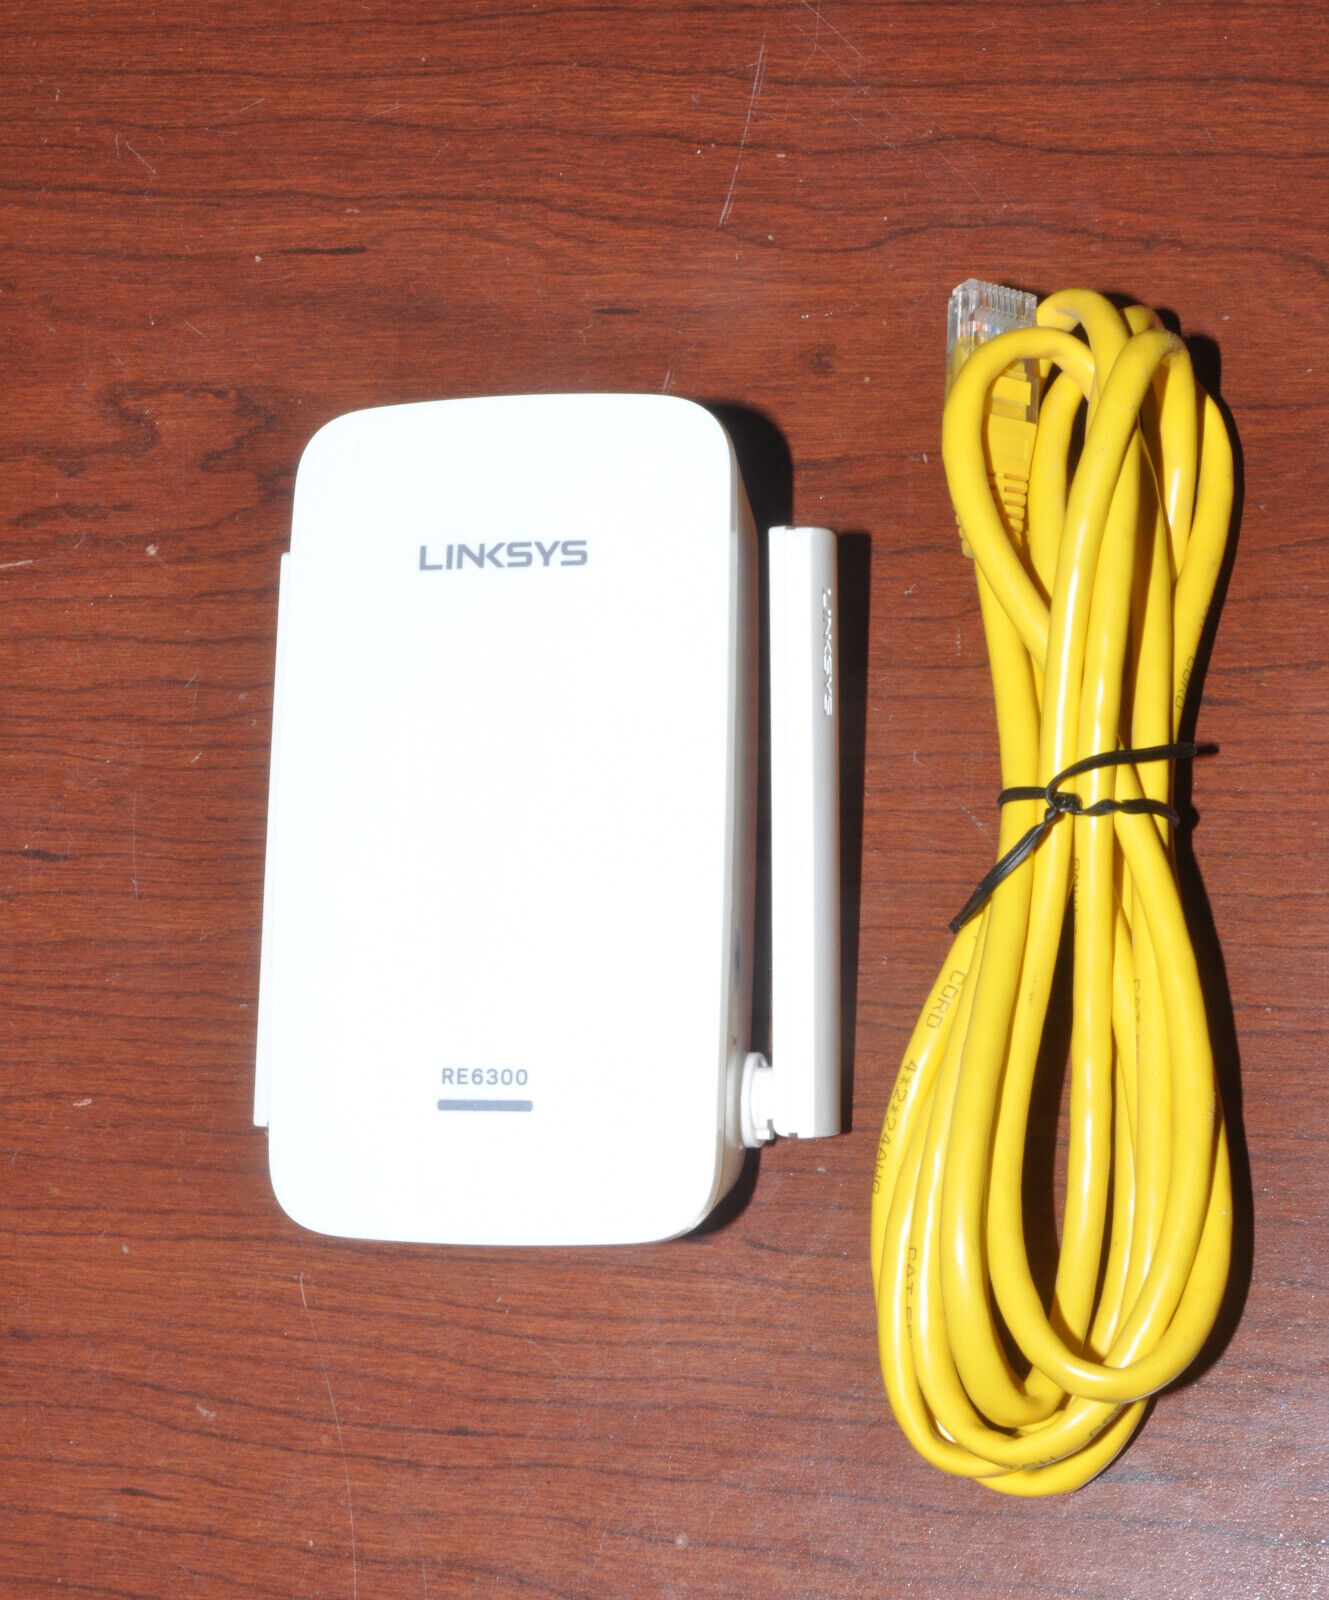 Linksys RE6300 AC1200 BOOST EX WiFi Extender 802.11ac Wireless Repeater